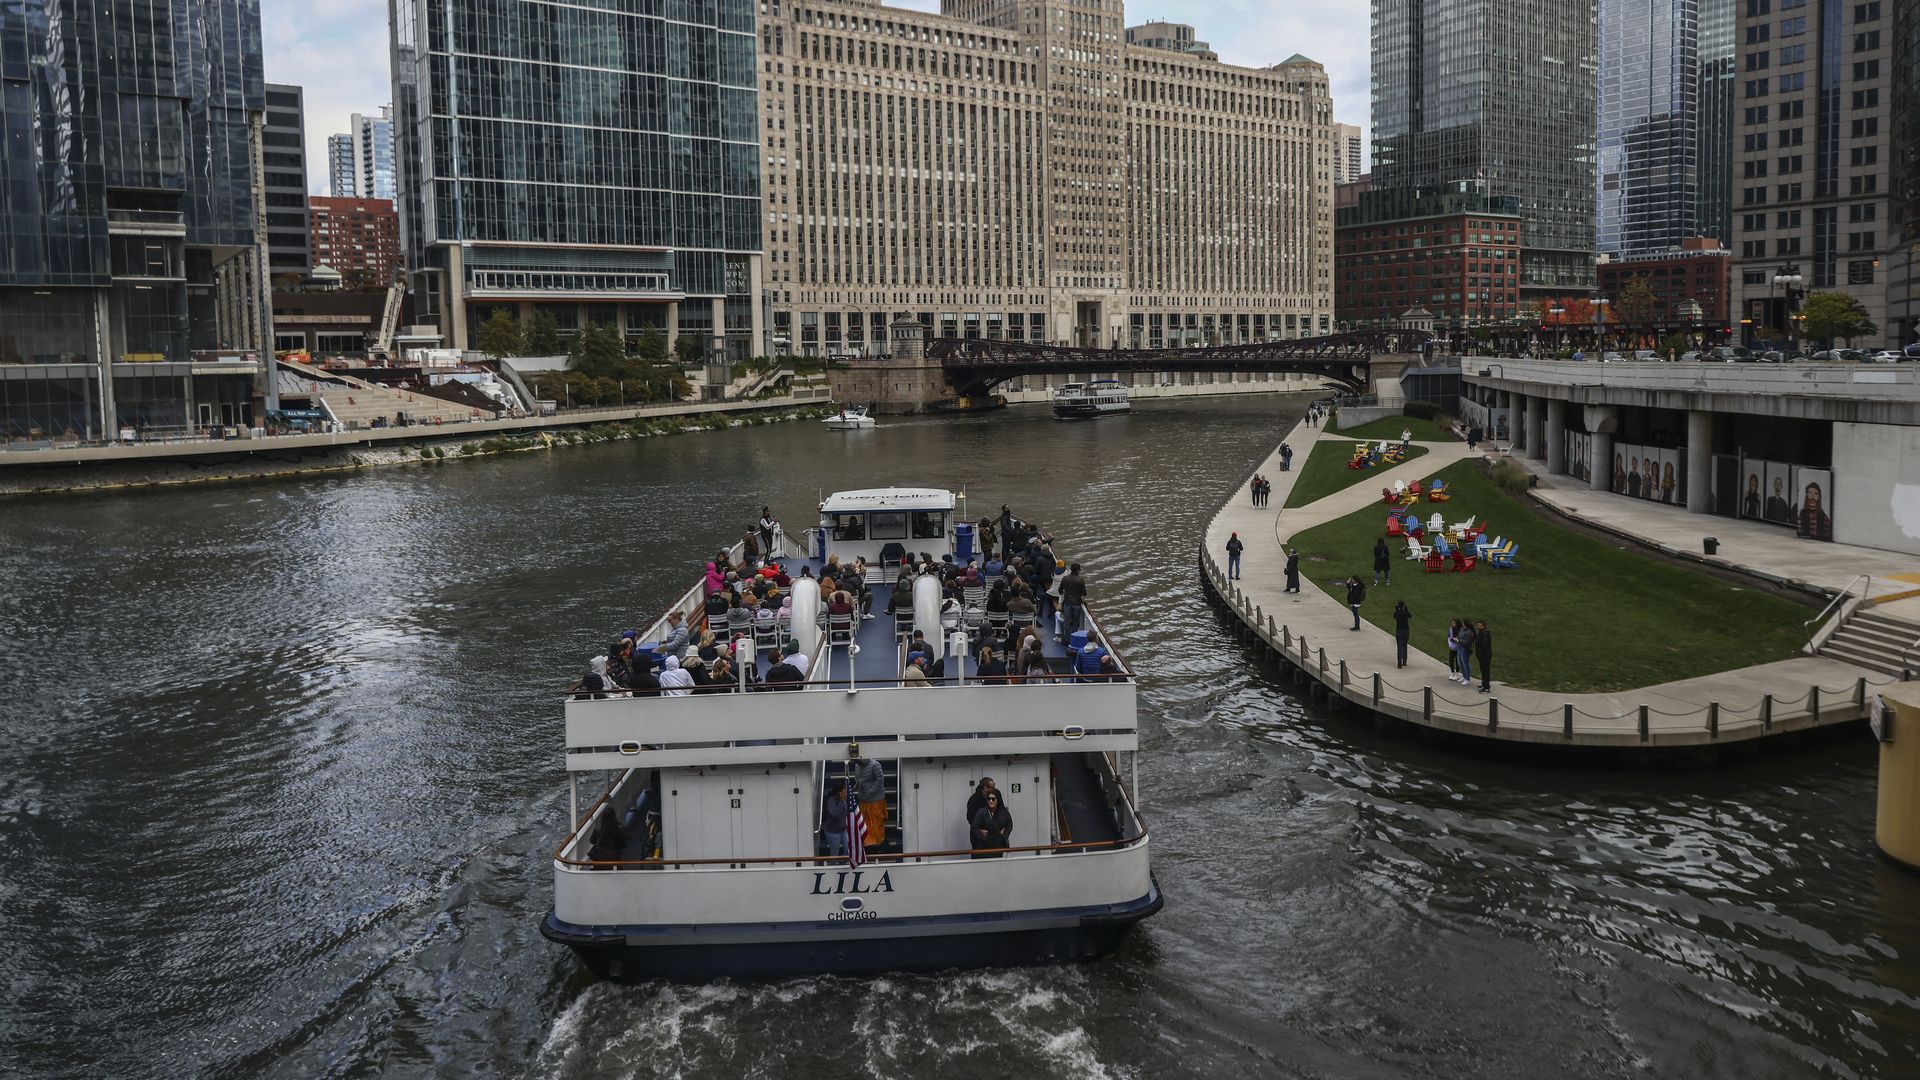 A view of Chicago River, Riverwalk.